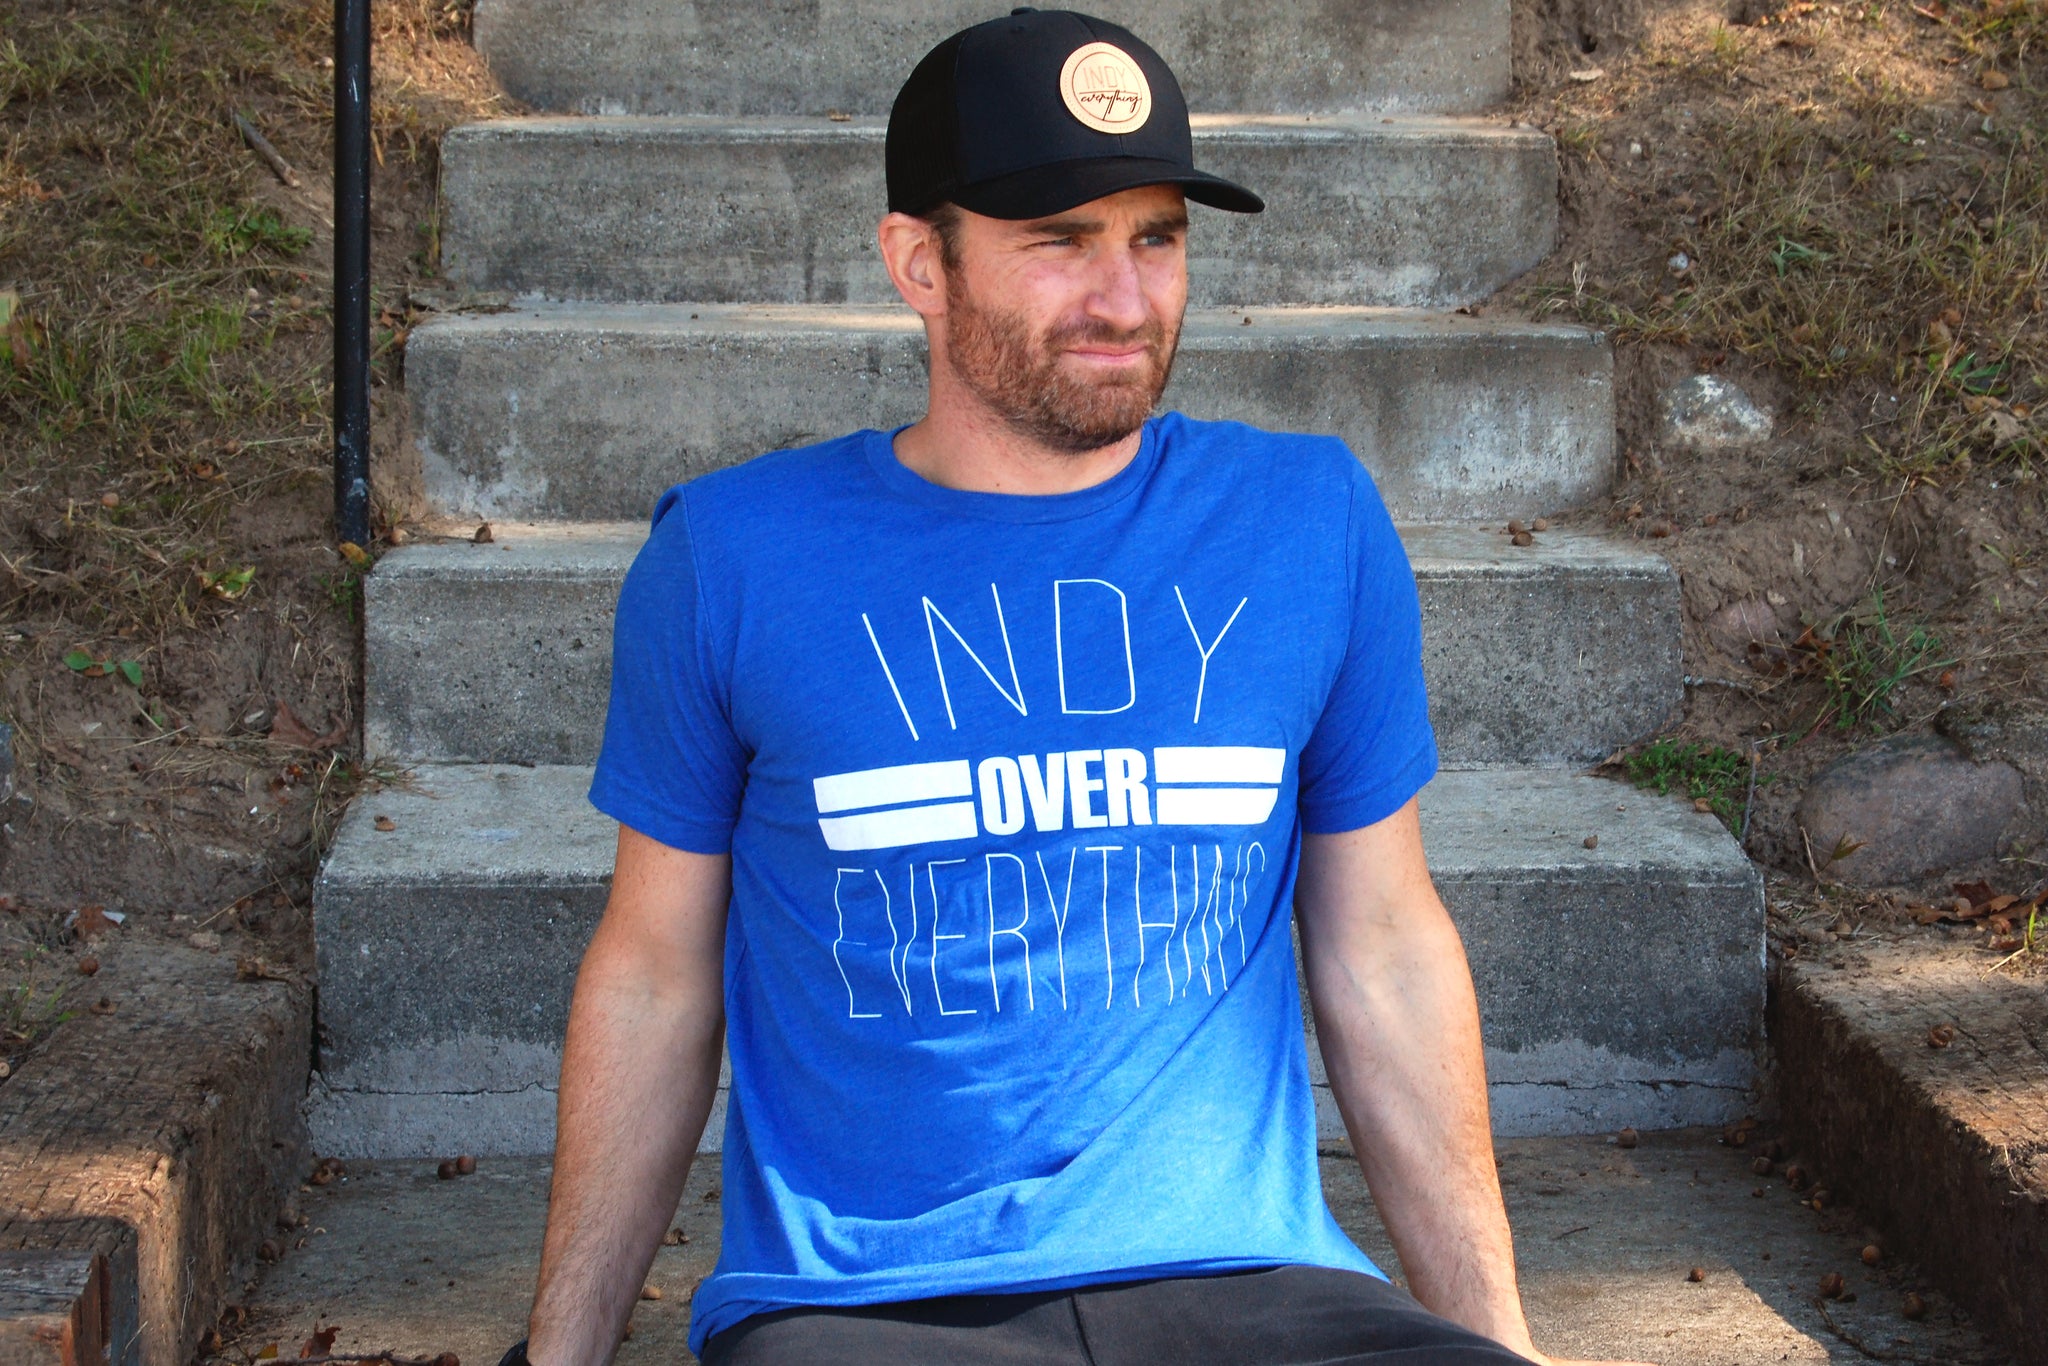 IOE Colts 2018 Tee - Indy Over Everything